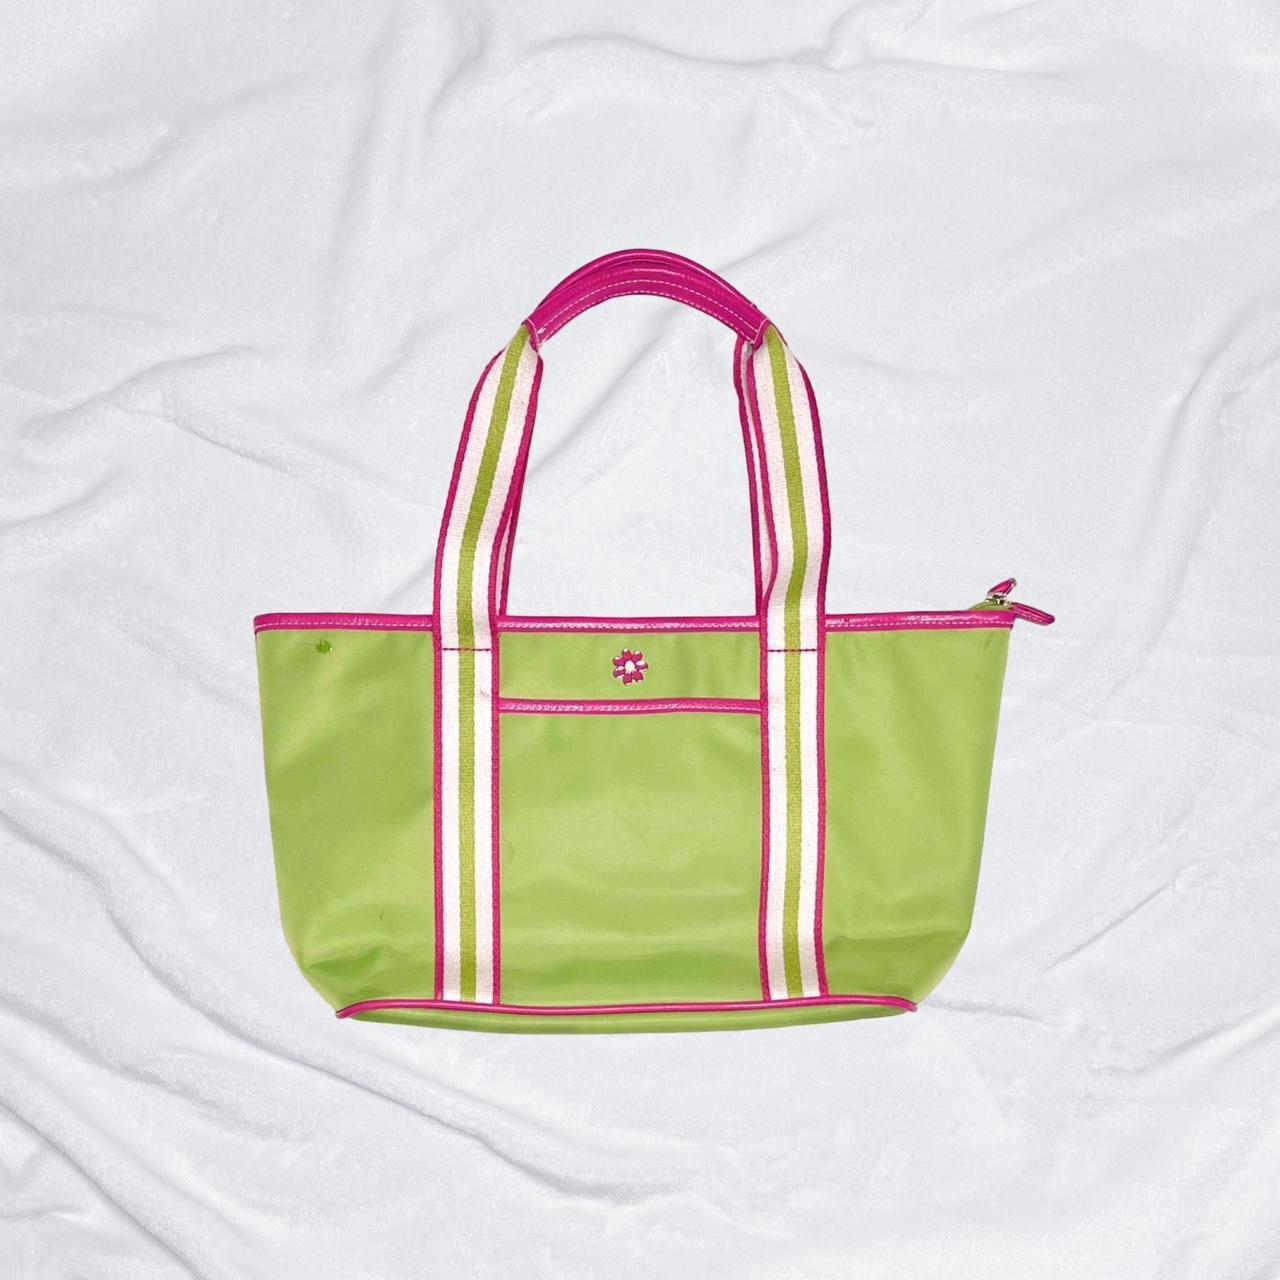 Sonoma Goods for Life Women's Shoulder Bags - Pink